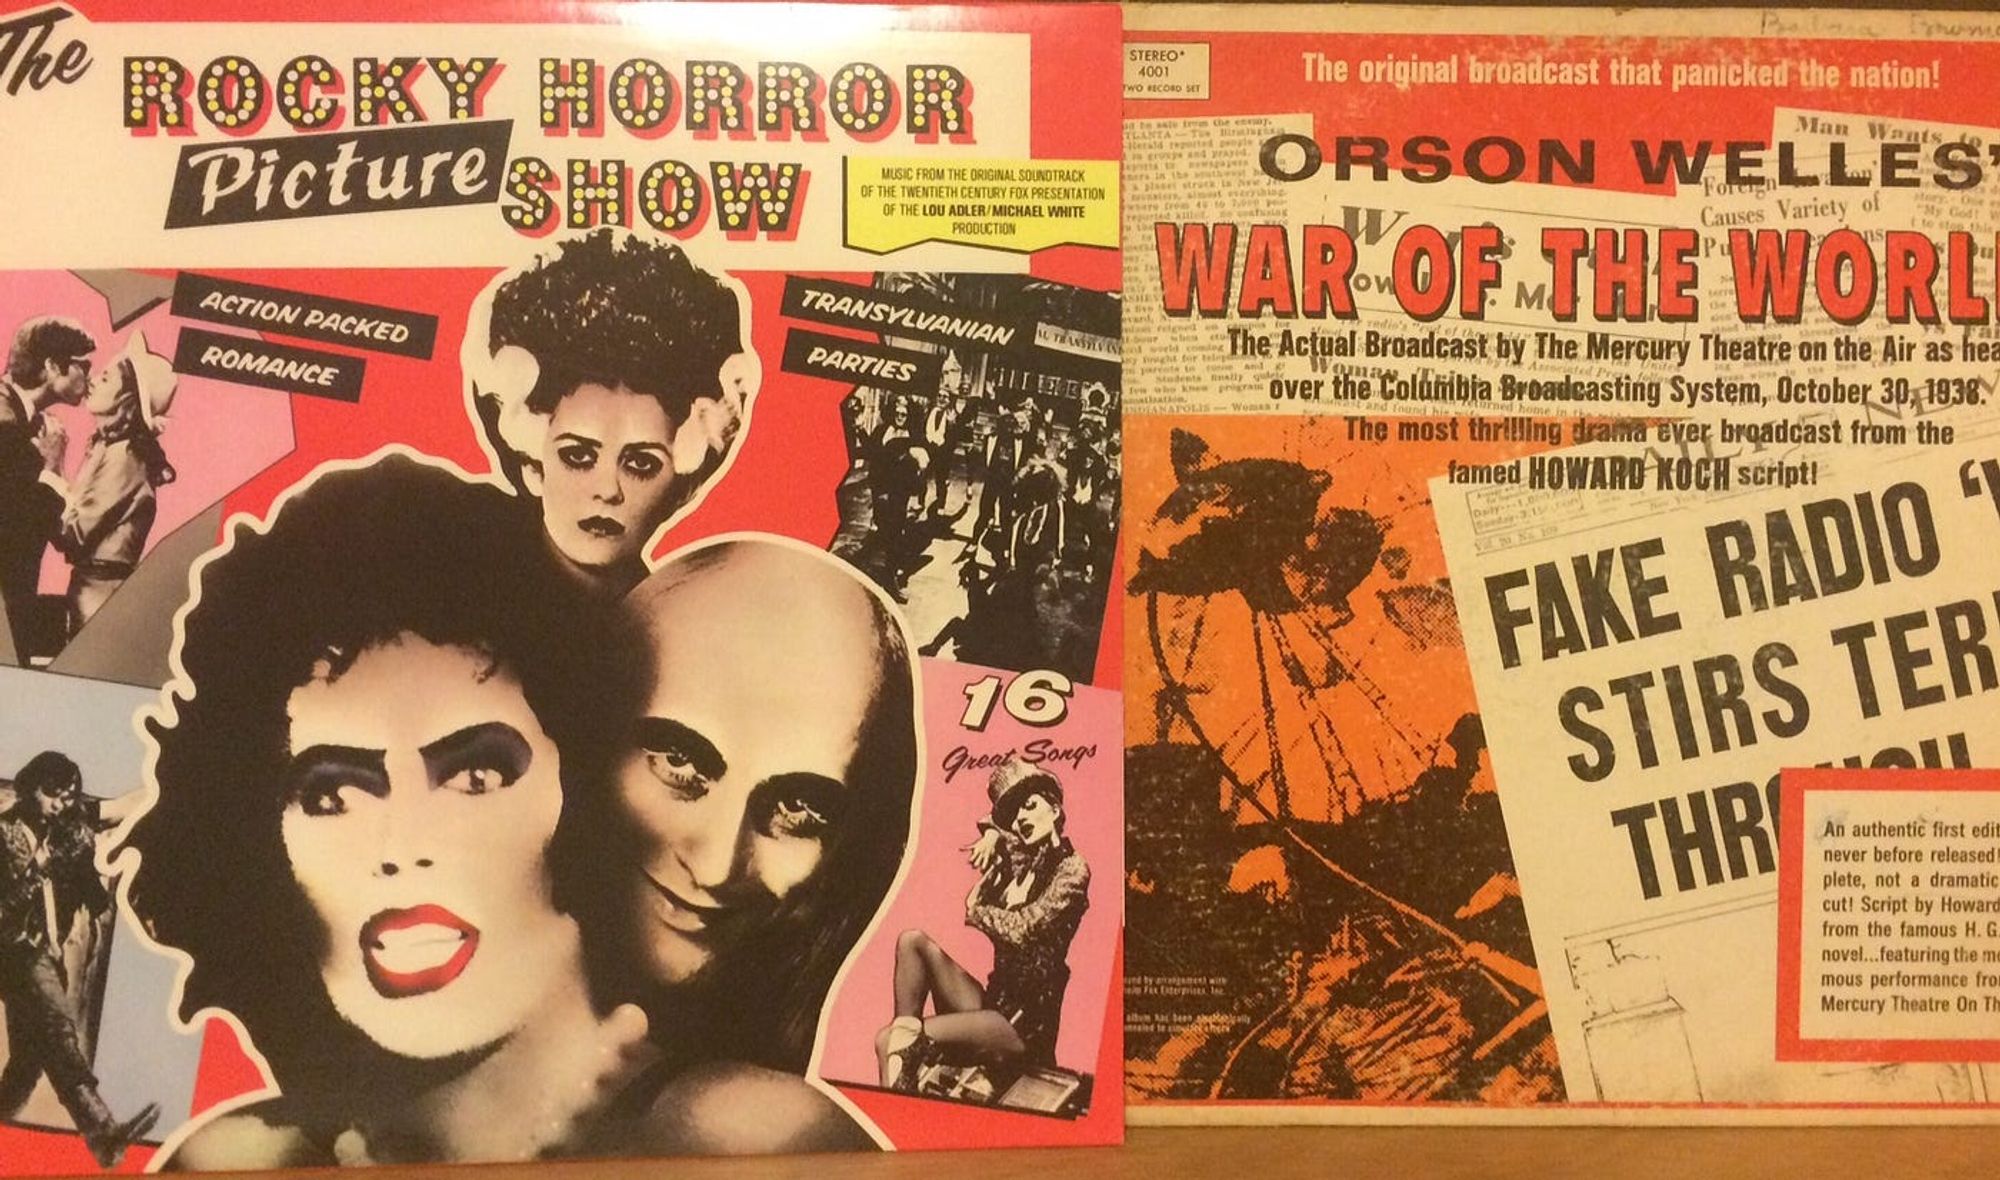 Interesting finds: The Rocky Horror Picture Show soundtrack, and a recording of Orson Welles’ radio broadcast of War of the Worlds.